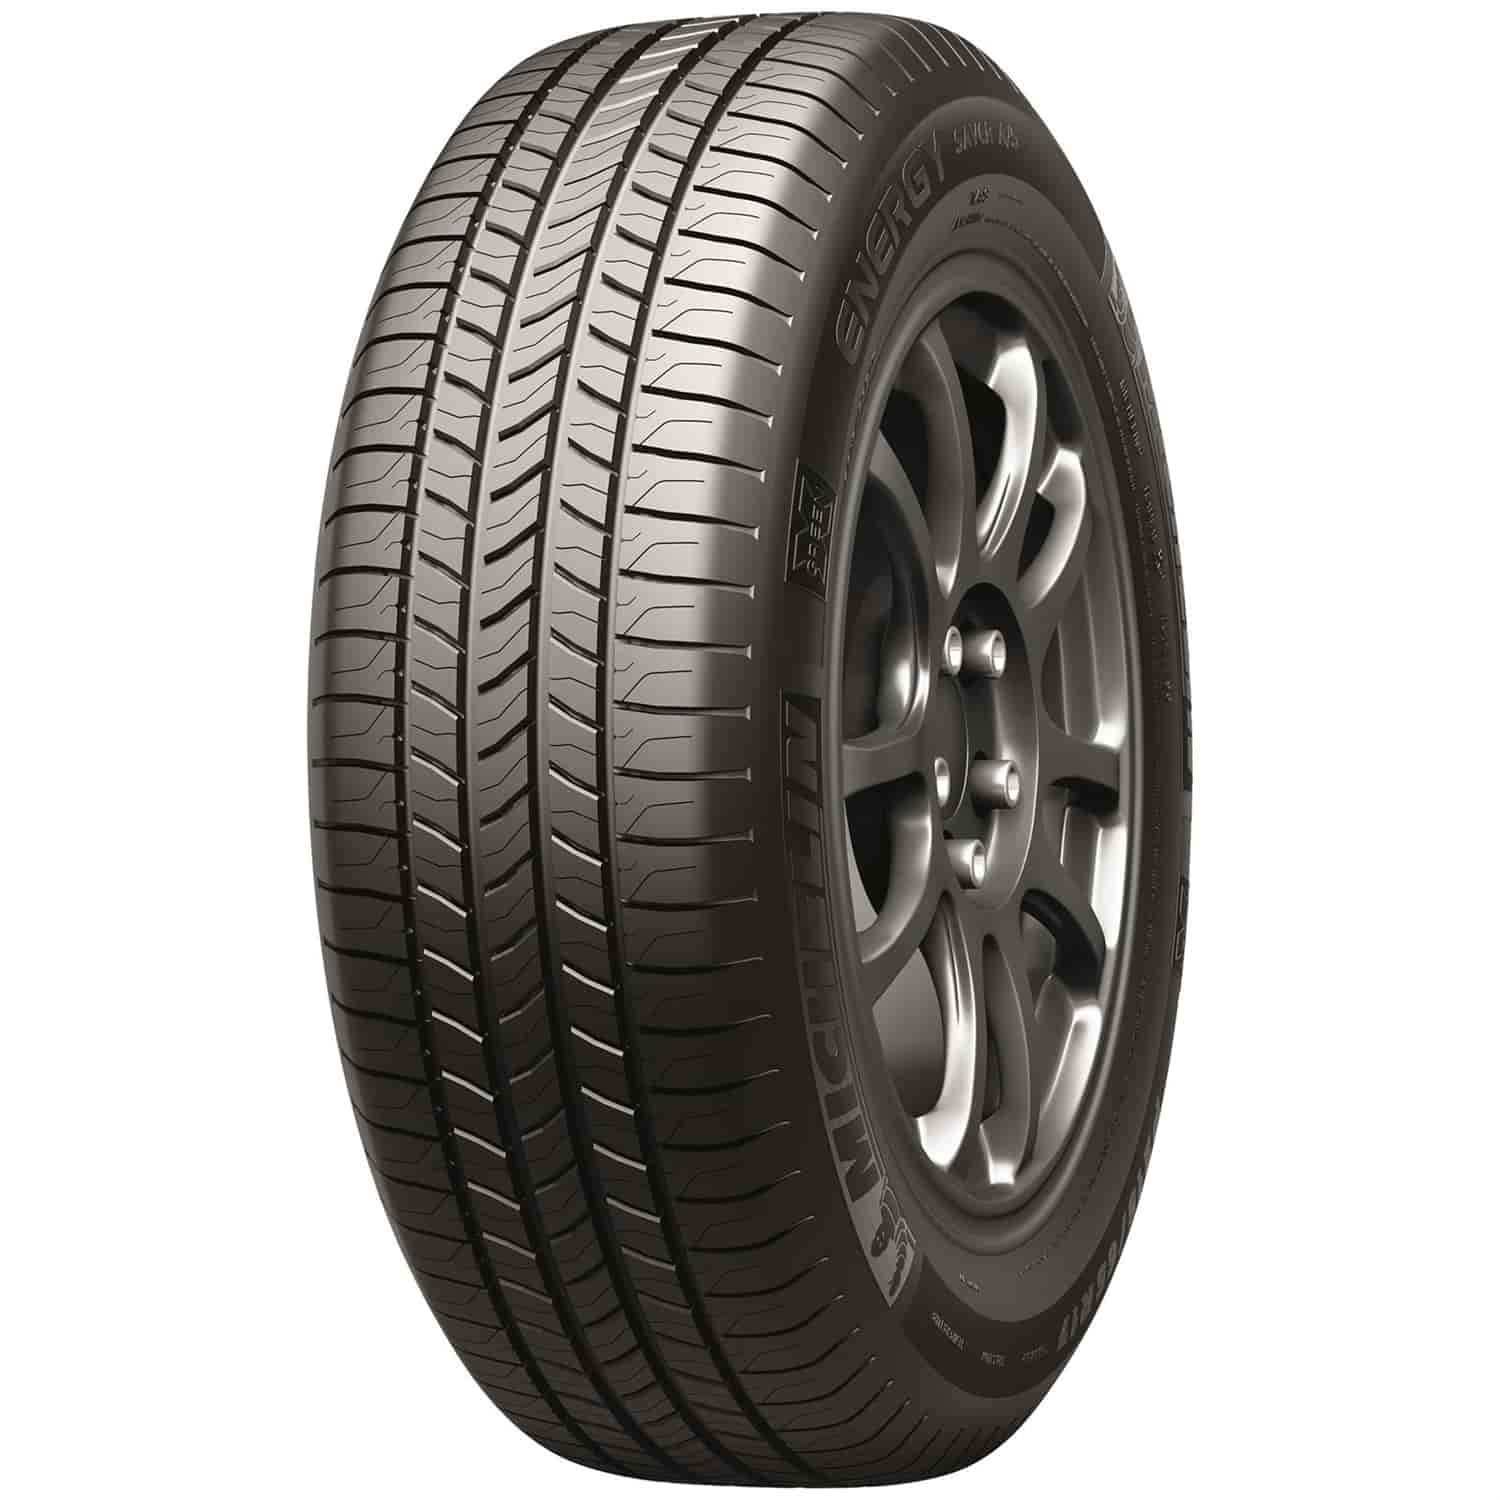 Energy Saver A/S 235/55R17 99H BSW